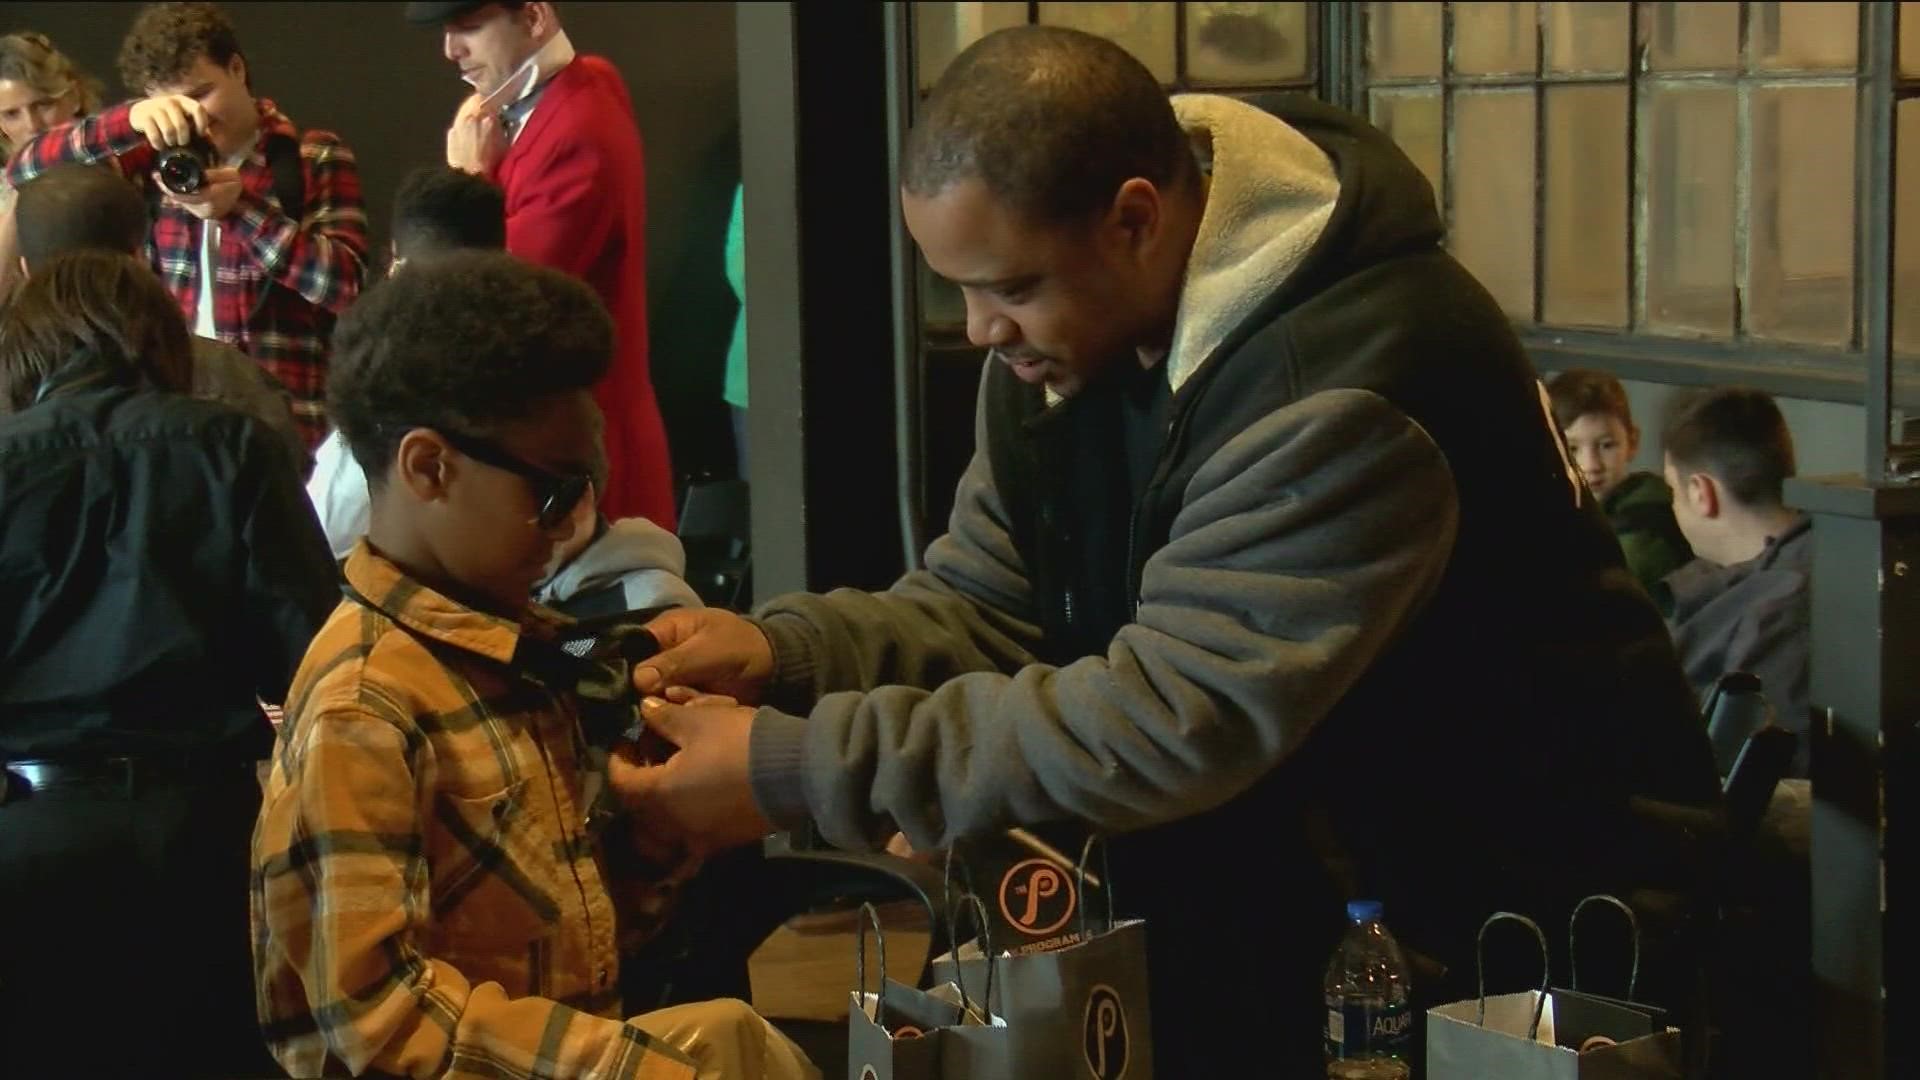 The Program Inc. offers mentorship to young men from Toledo to help curb the effects of fatherless homes.